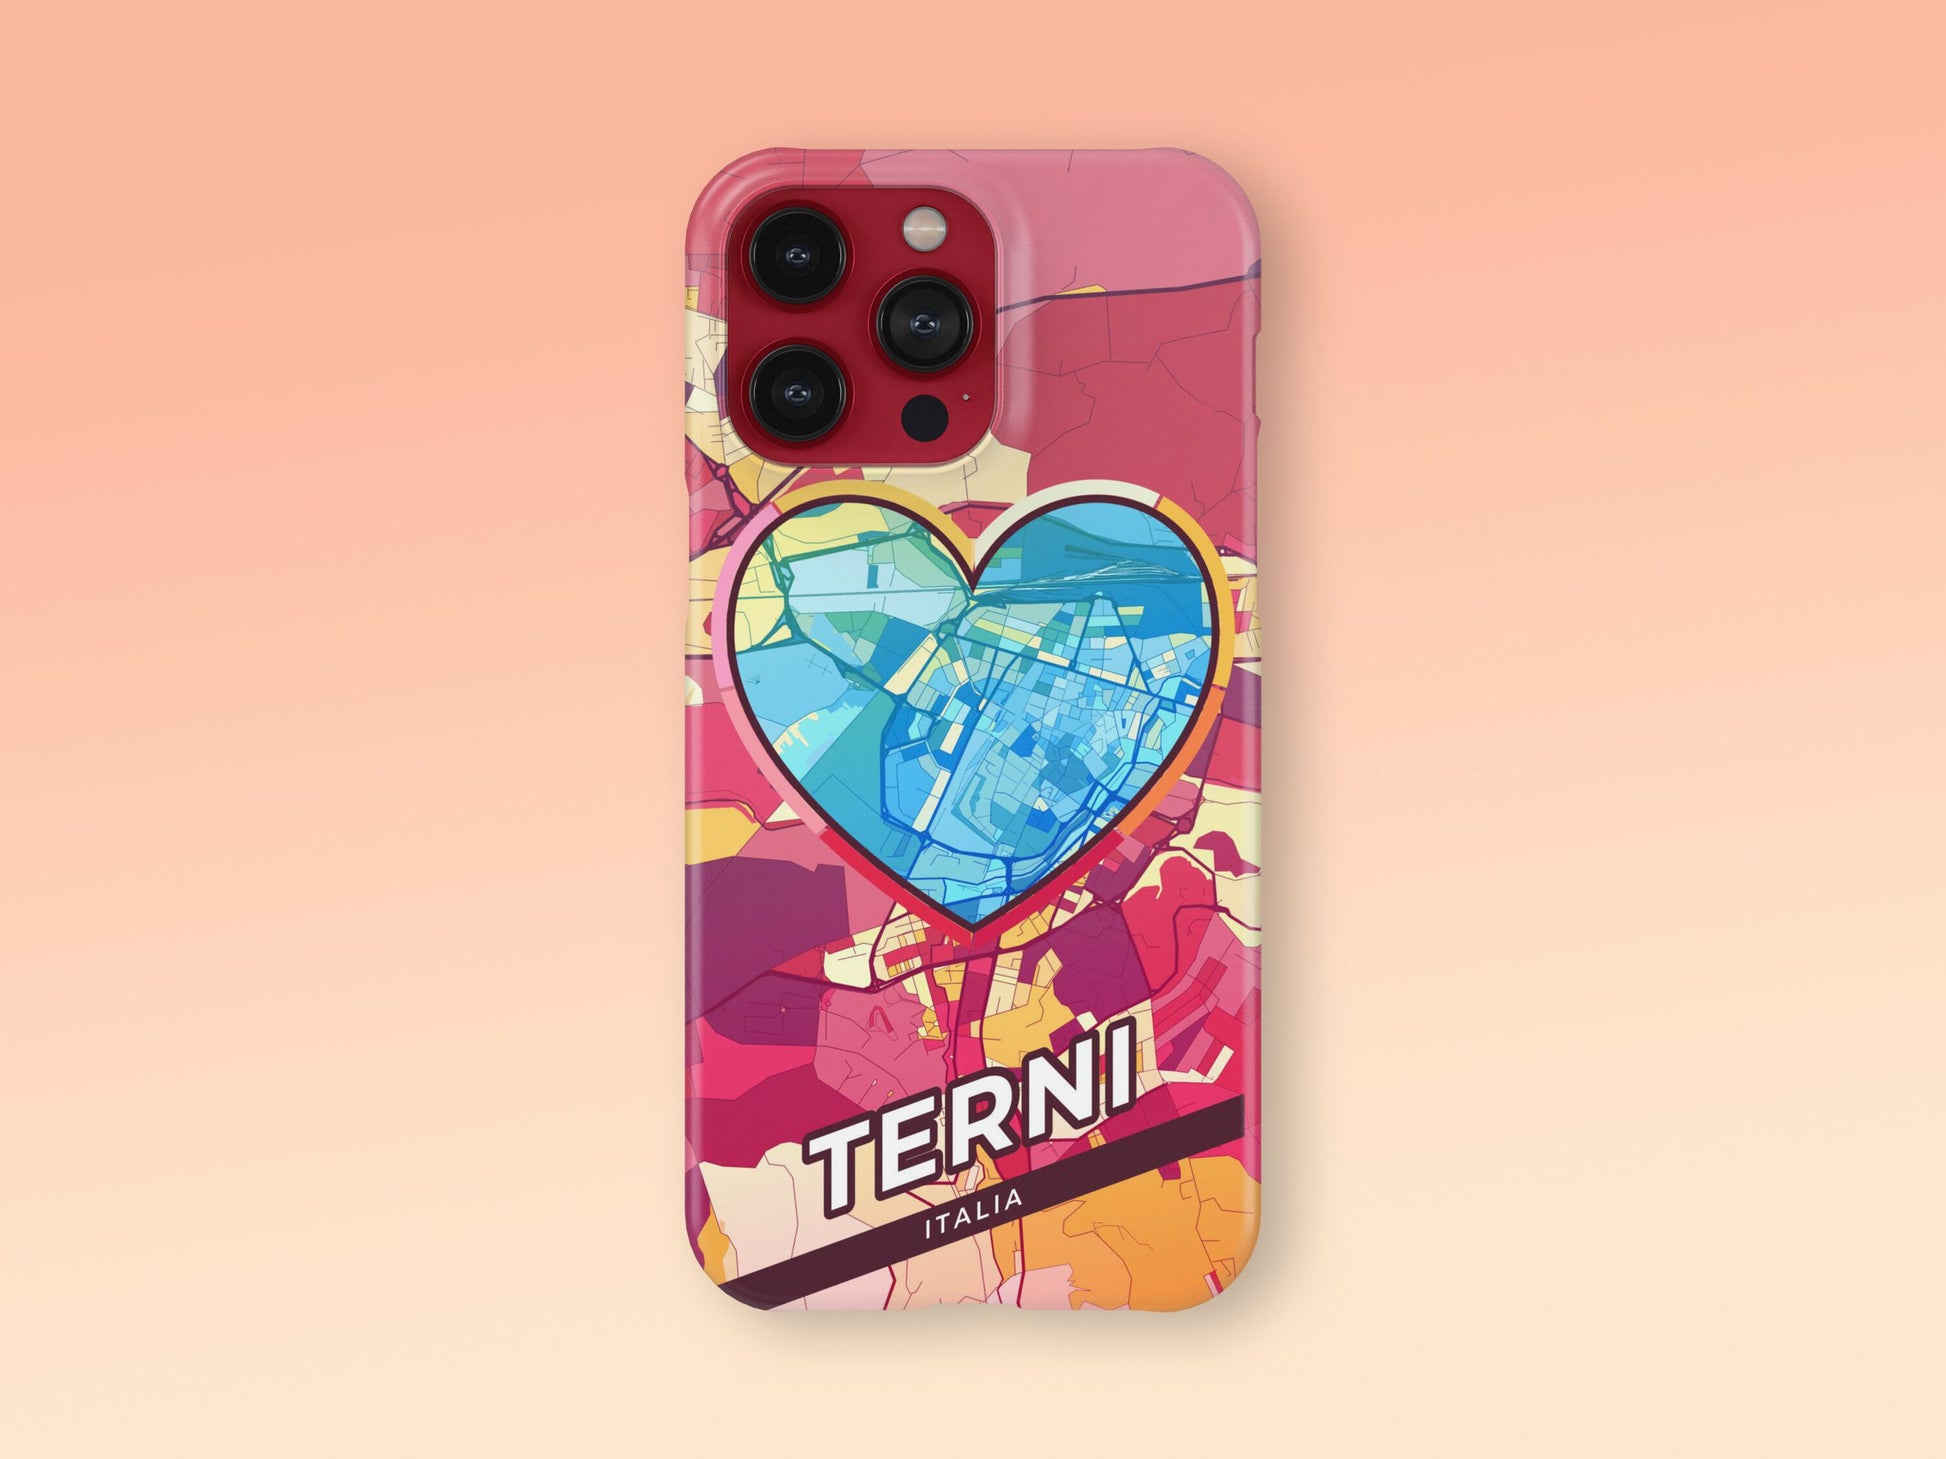 Terni Italy slim phone case with colorful icon 2